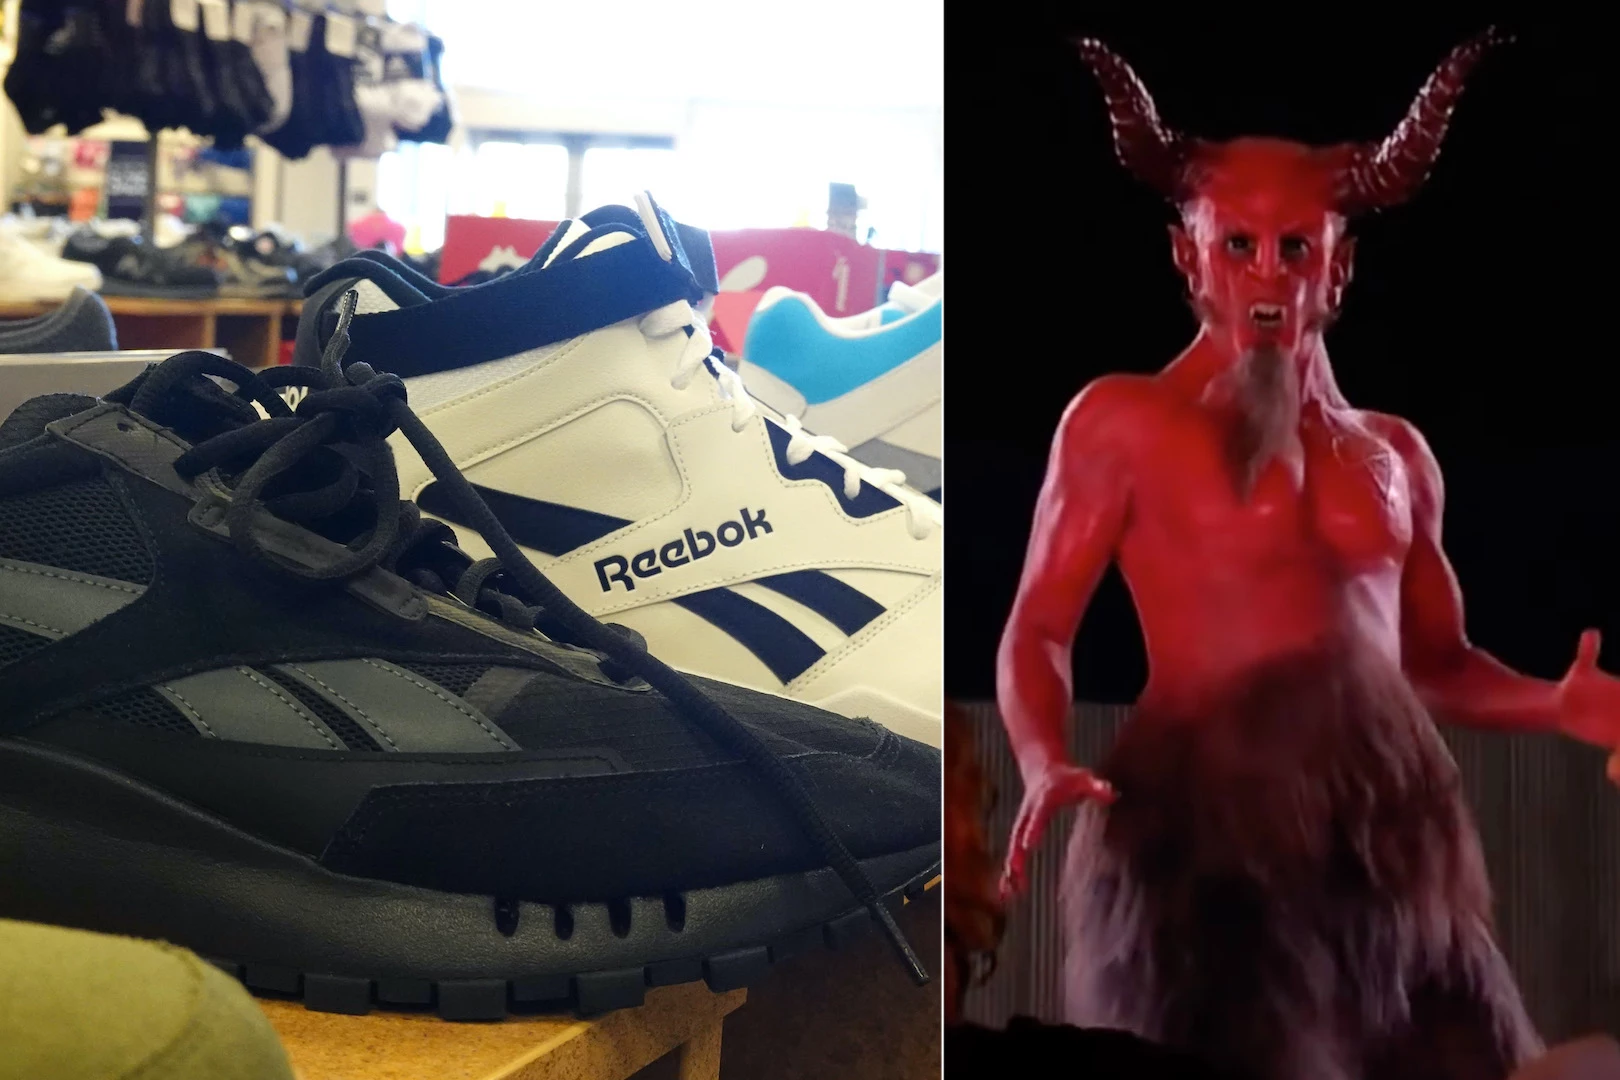 Second grade Travel agency Intimate Religious Facebook Group Believes This Reebok Shoe Is Satanic